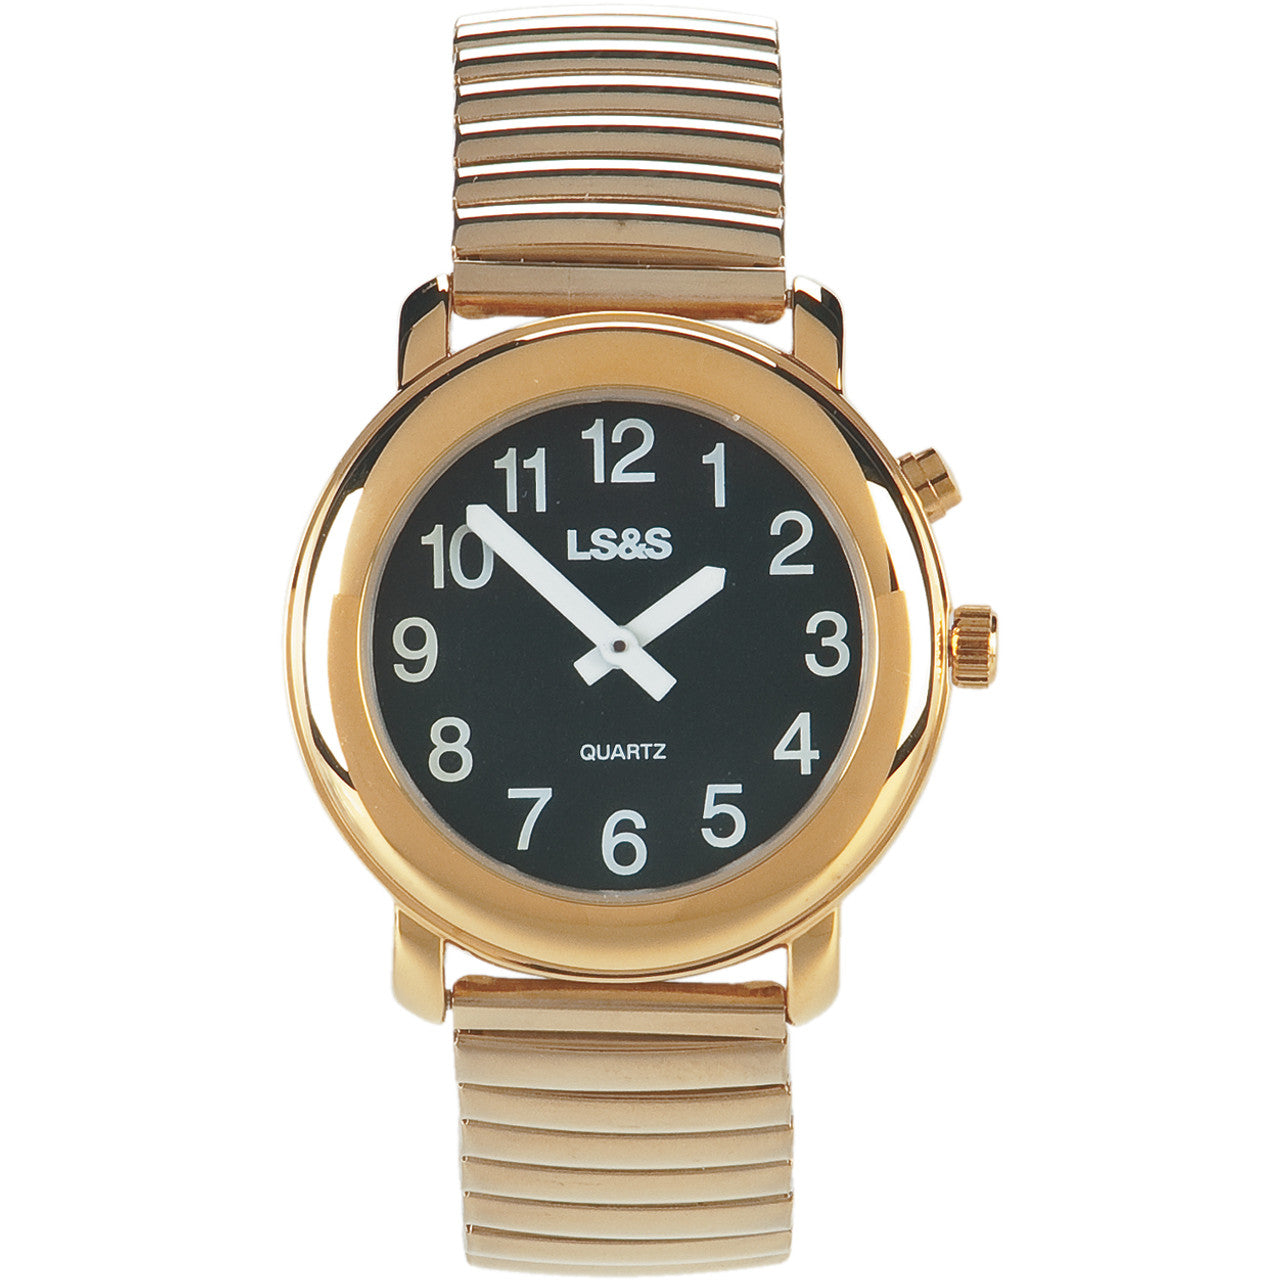 1 BUTTON, MEN'S BLK FACE Low Vision watch with gold tone flex ban with white arms.